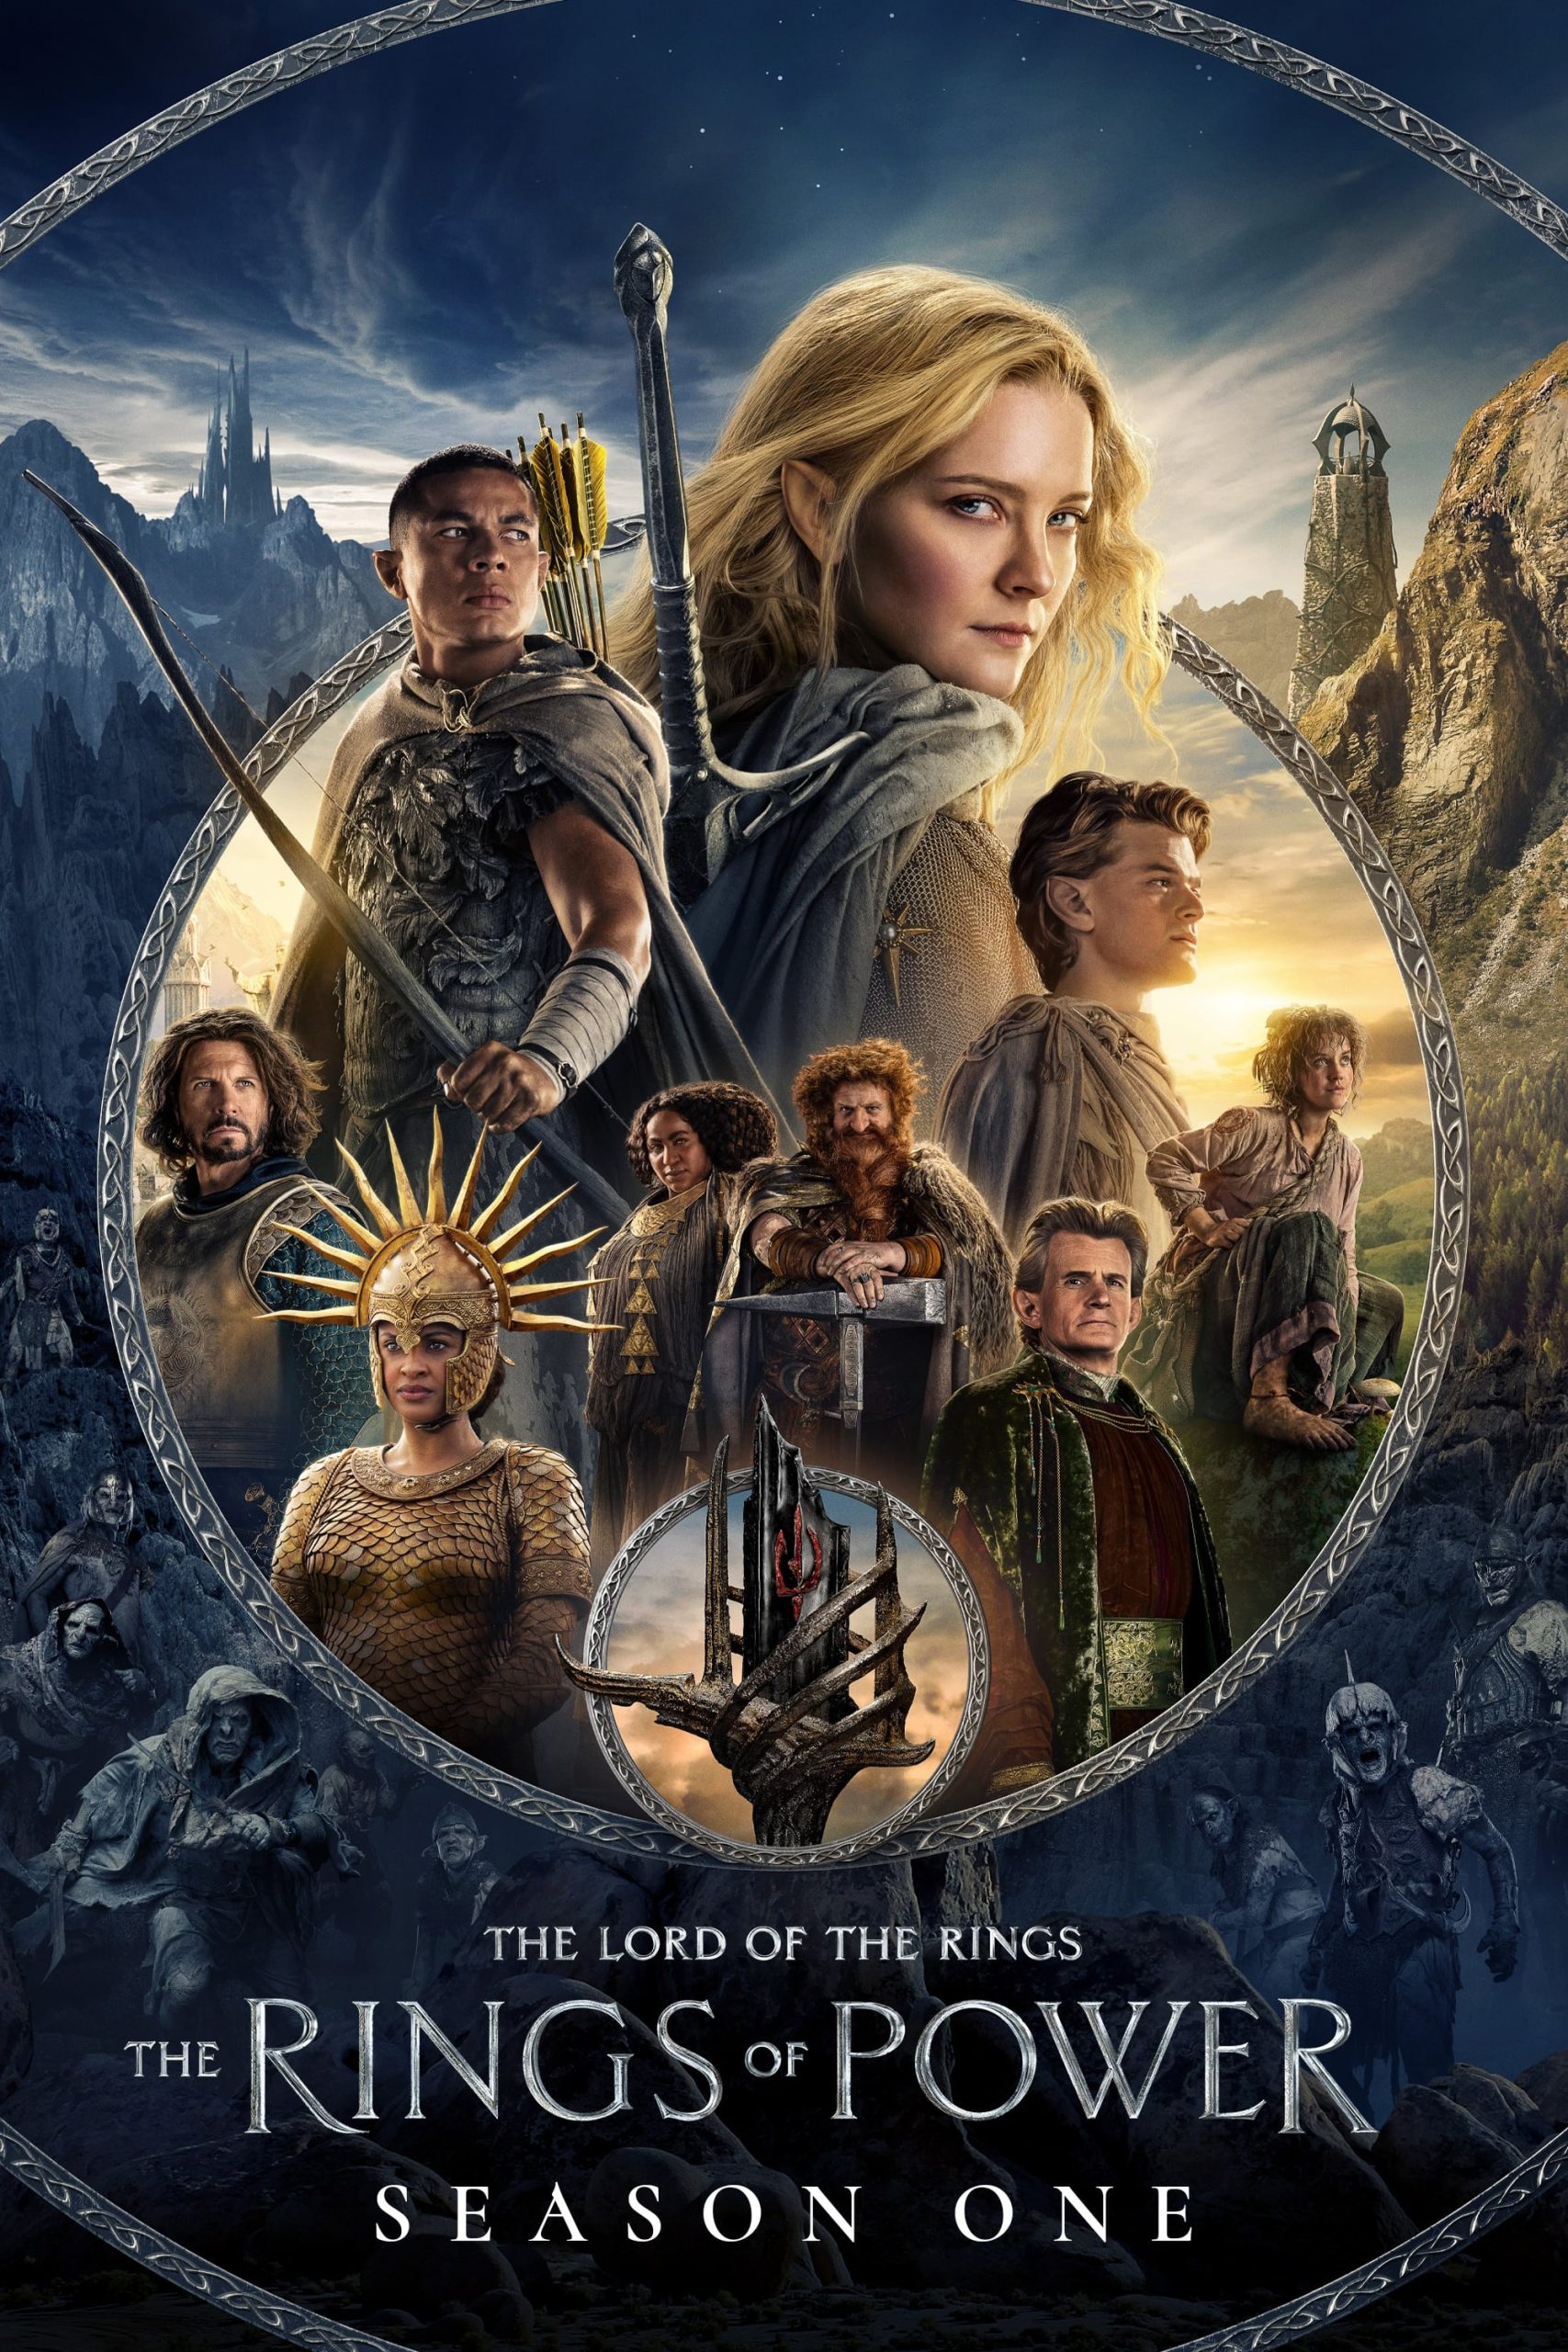 The Lord of the Rings The Rings of Power (2022) แหวนแห่งอำนาจ